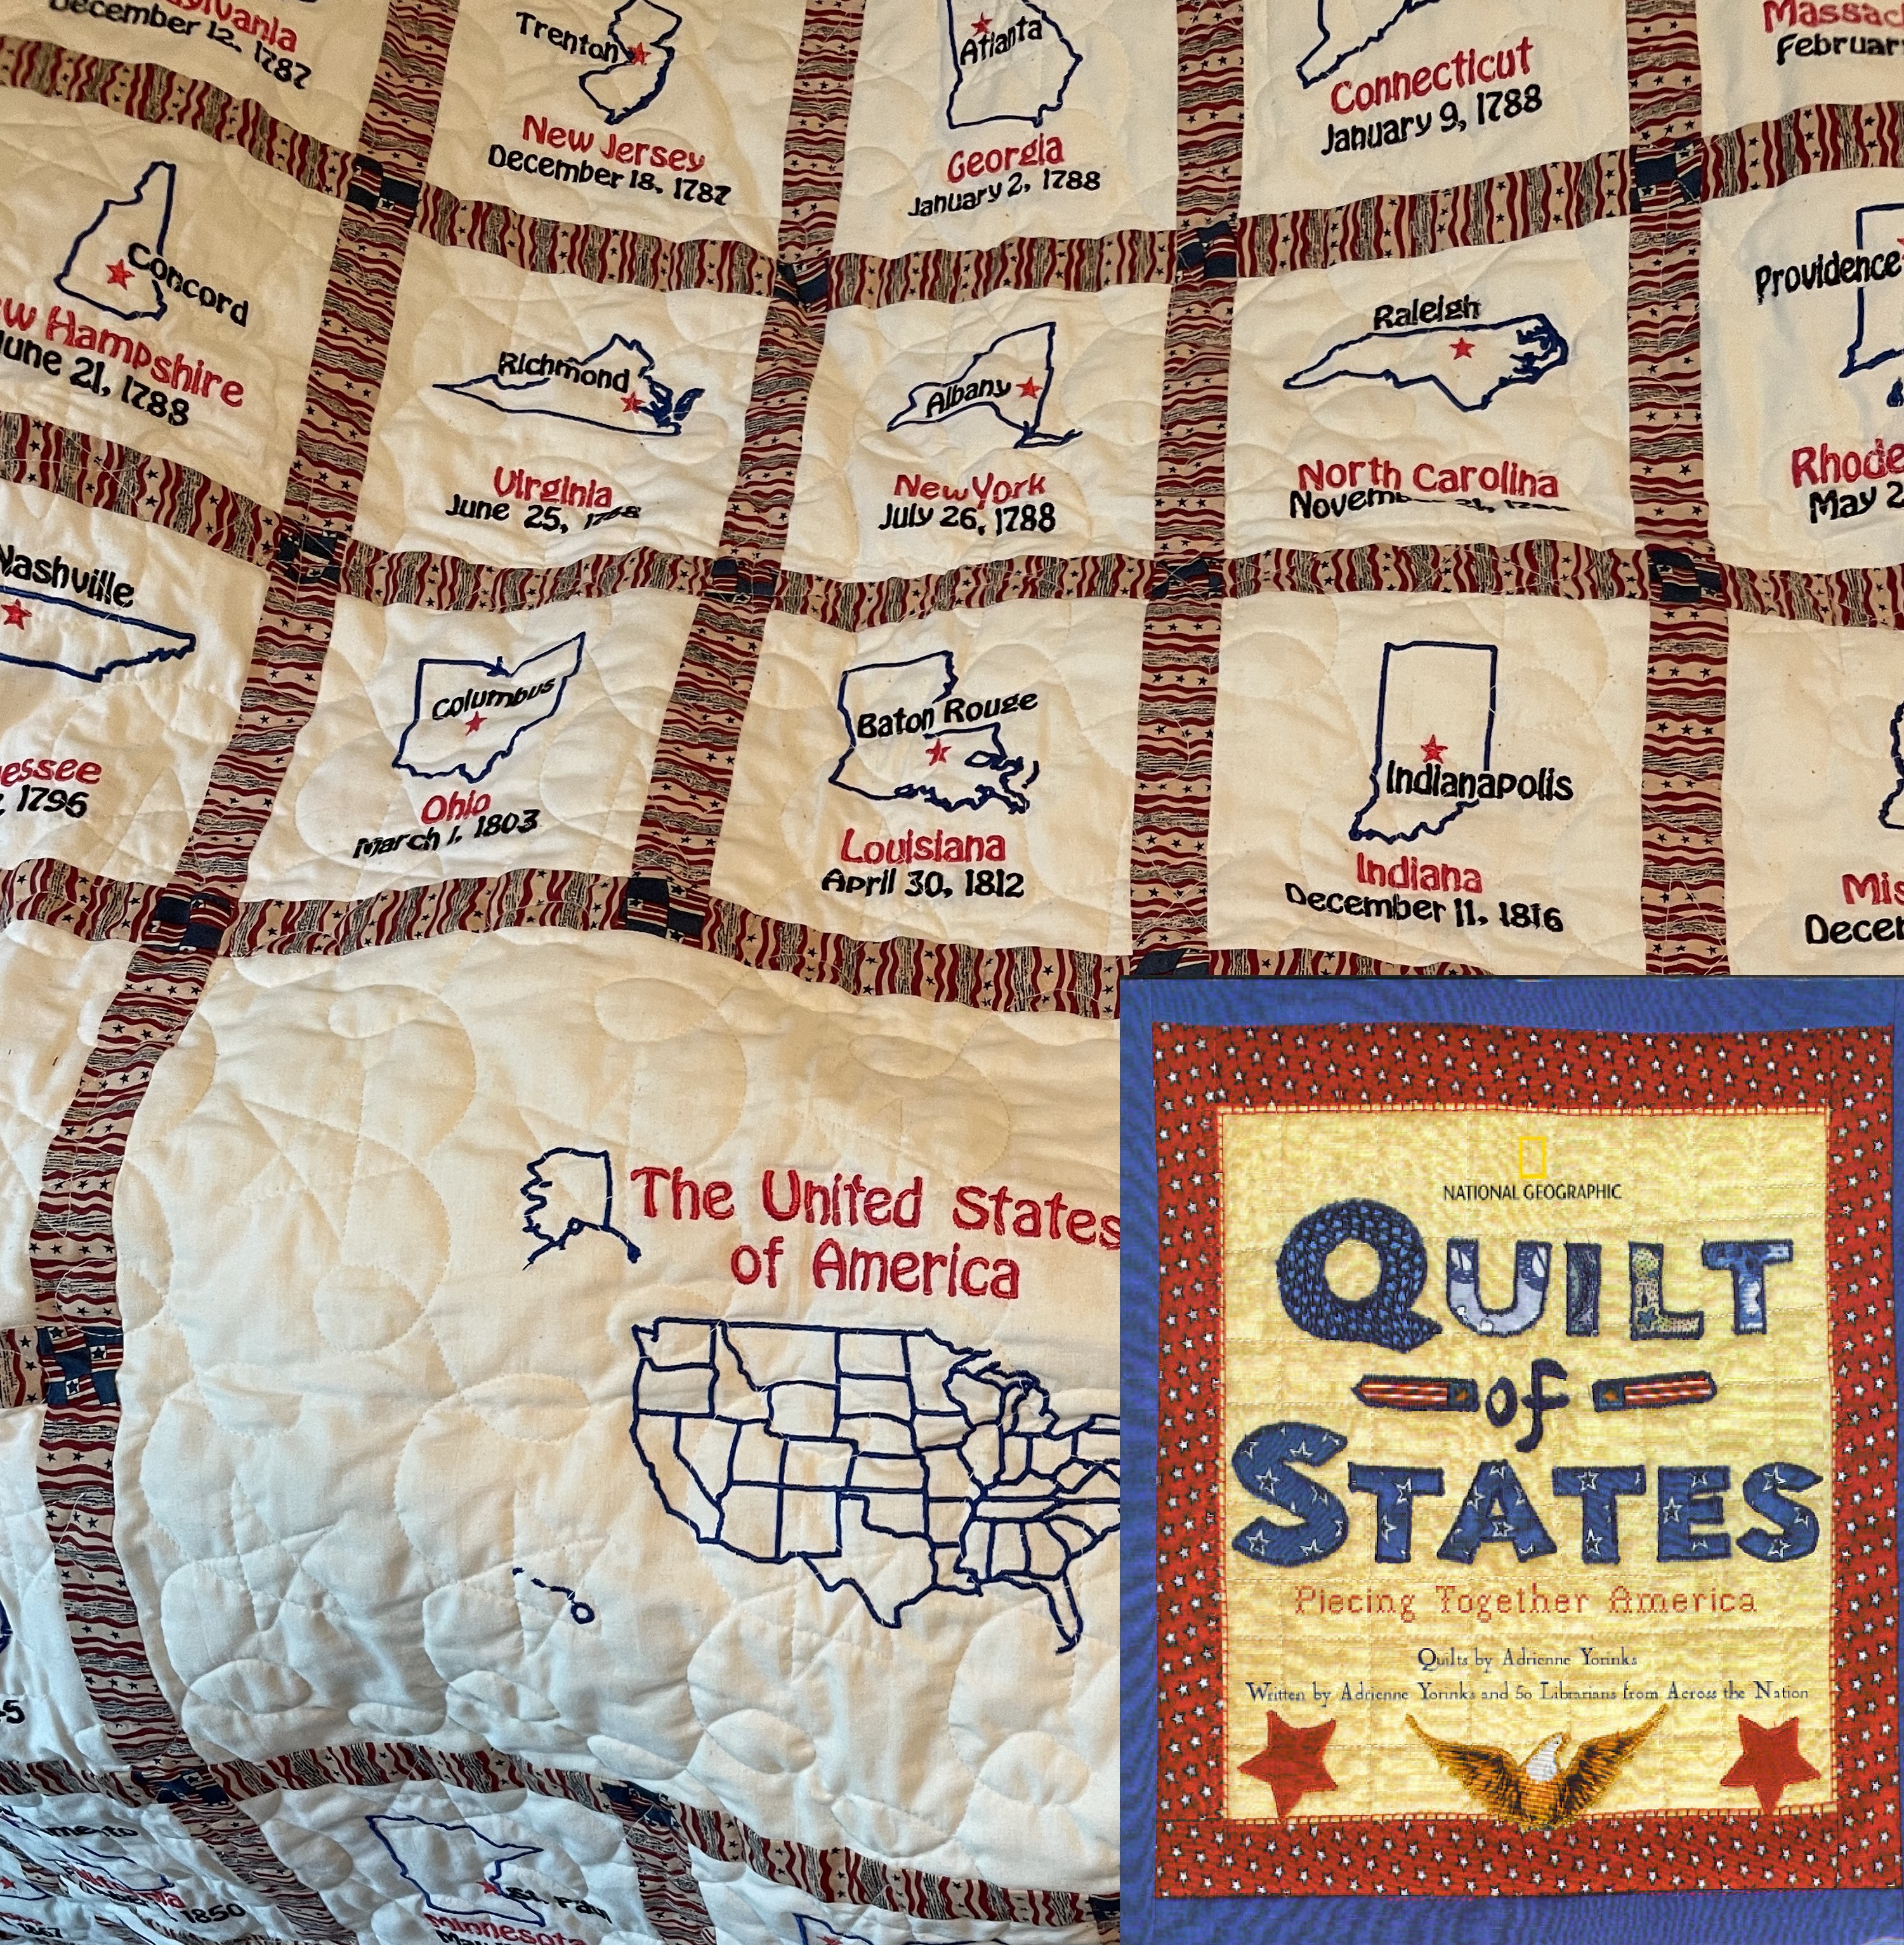 Quilt of States